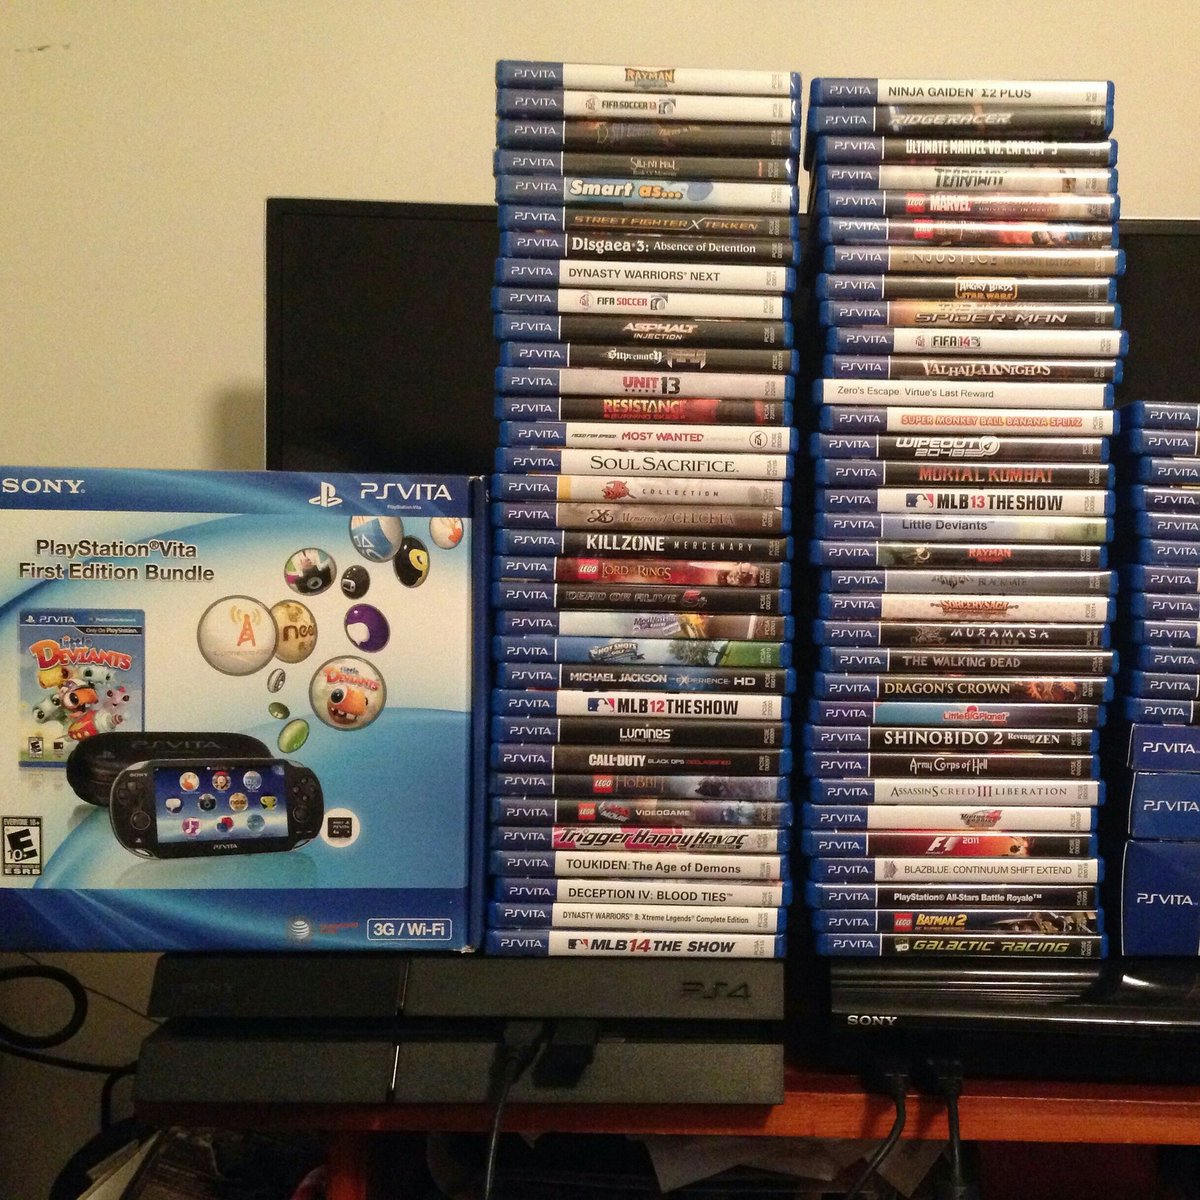 Another massive #PSVita #game collection What do you think, are you jealous...